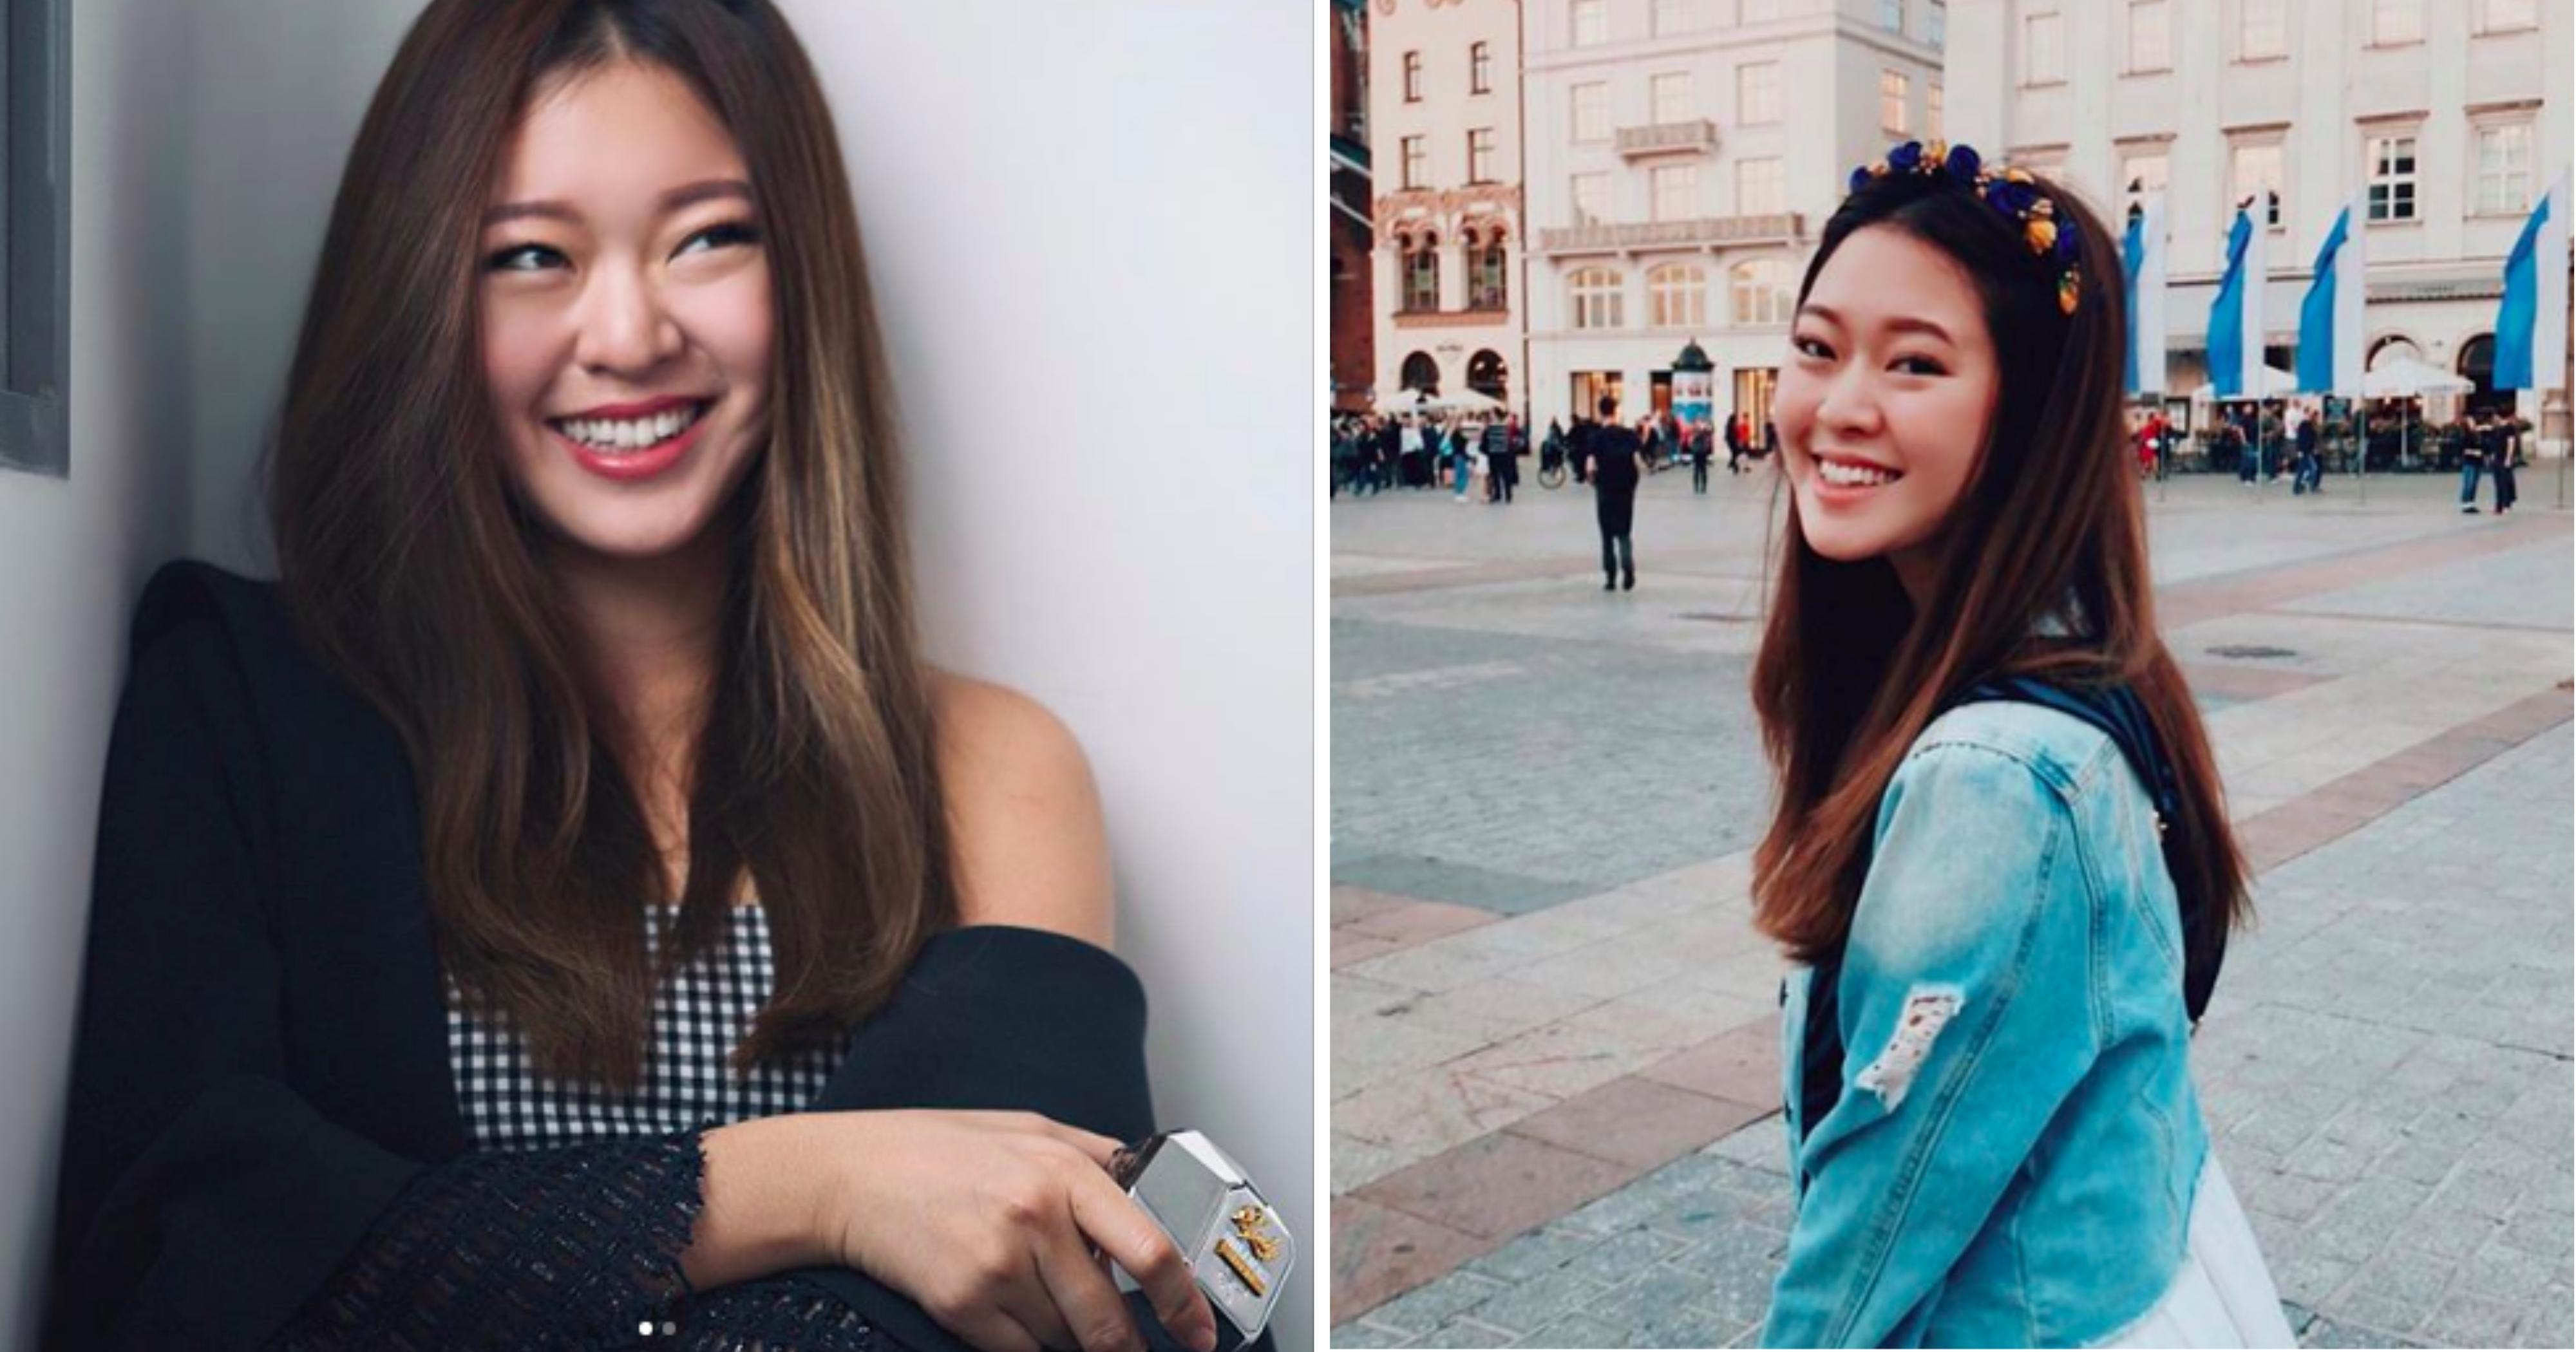 S Porean Influencer Bellywellyjelly Opens Up About Cyber Bullying Sexual Ha...